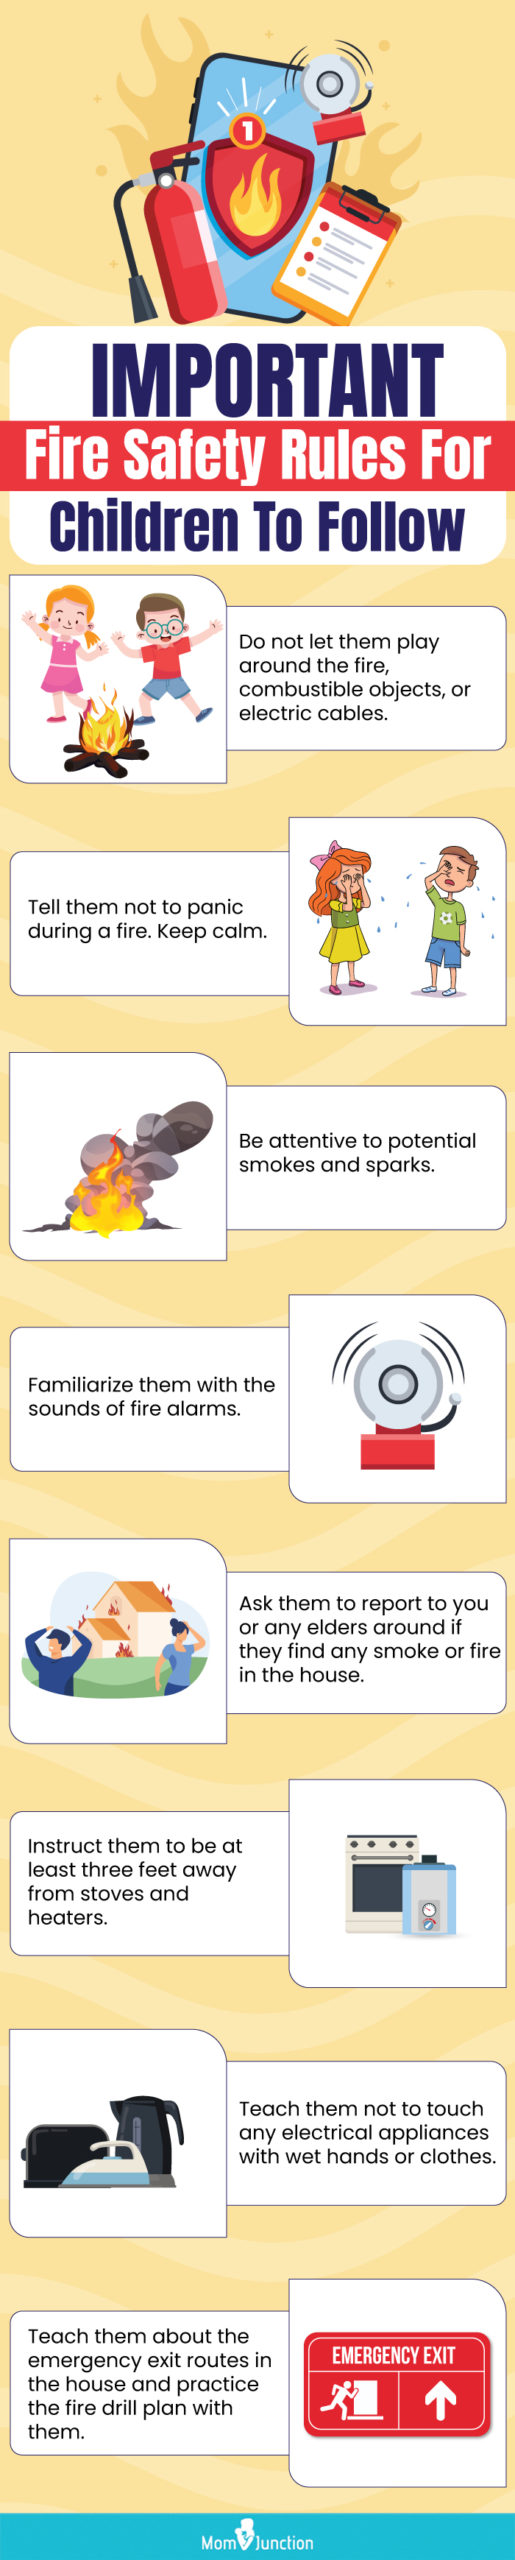 important fire safety rules for children to follow (infographic)